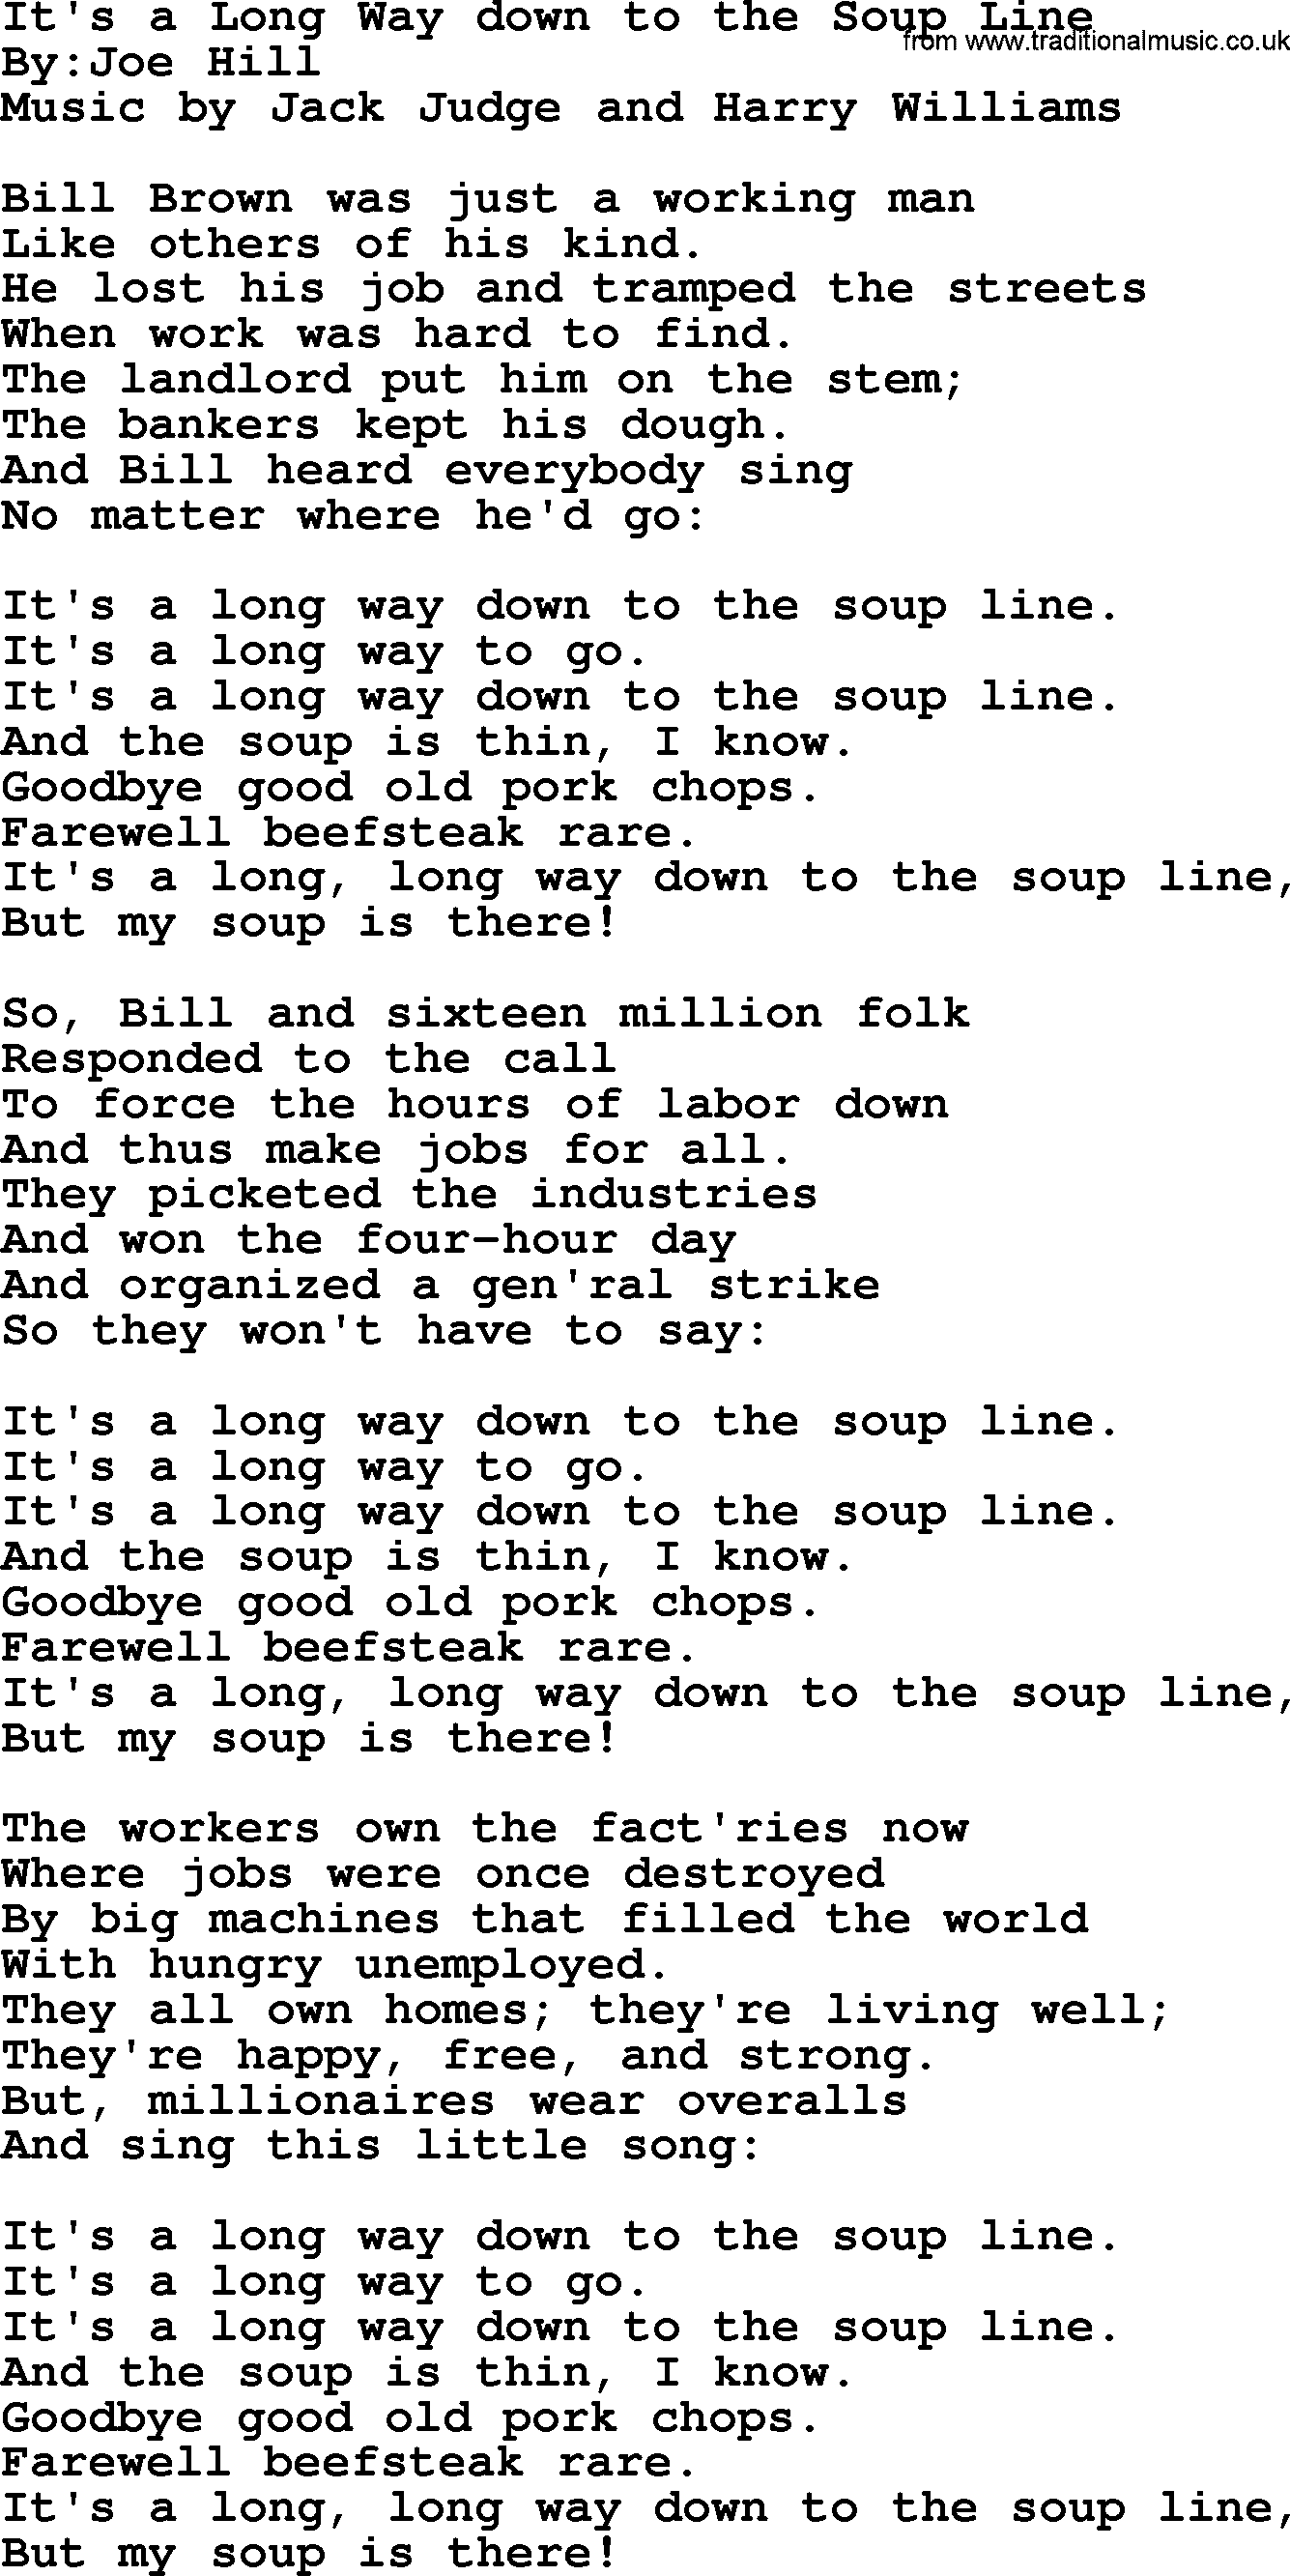 Political, Solidarity, Workers or Union song: Its A Long Way Down To The Soup Line, lyrics